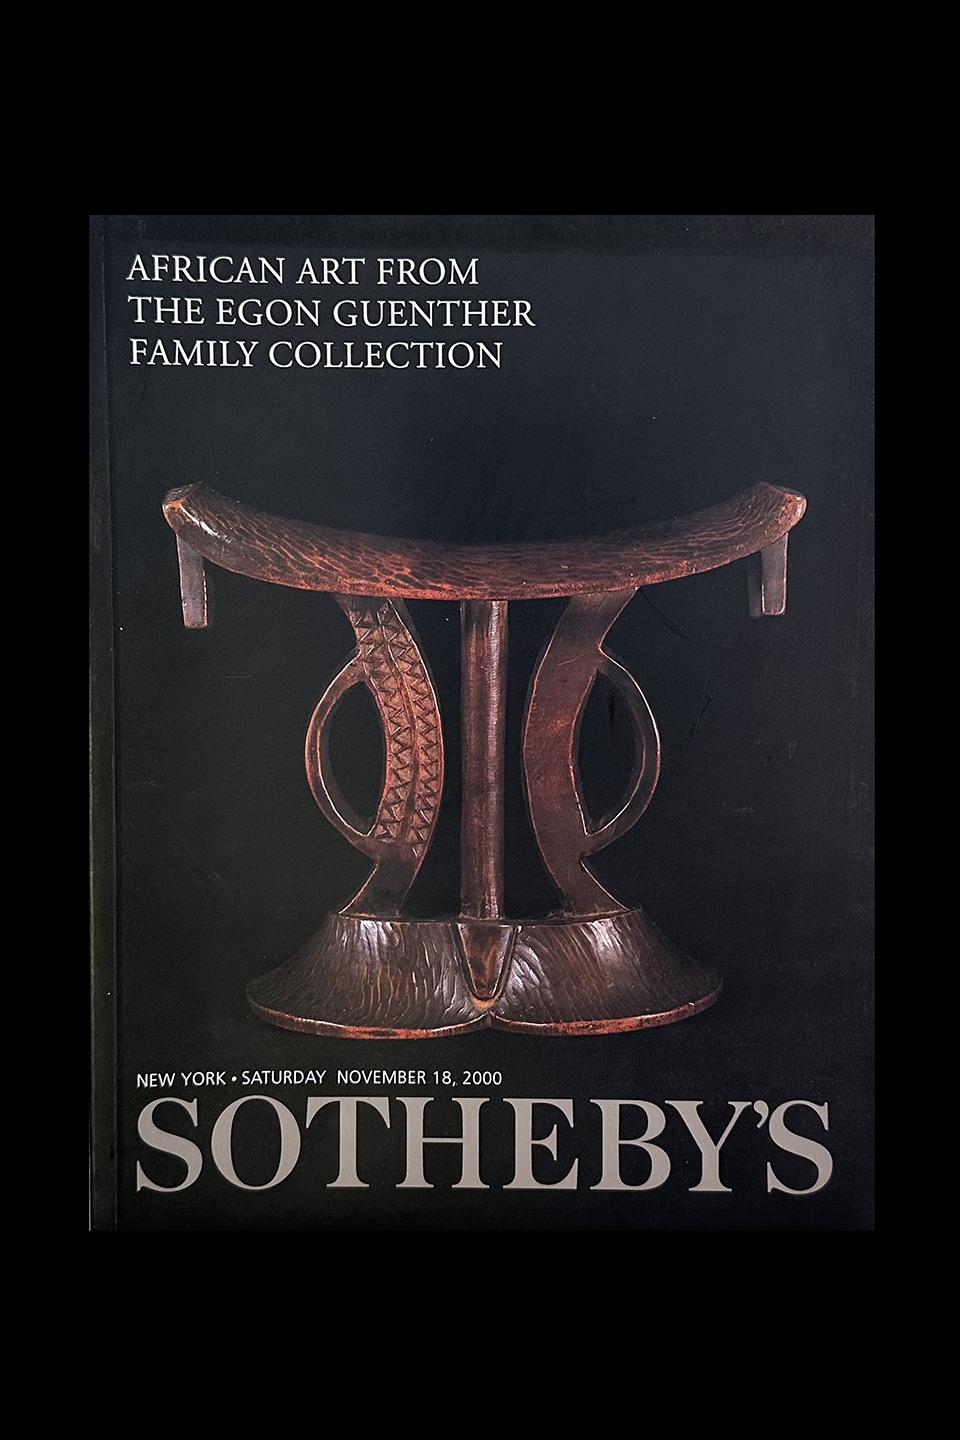 Sotheby's -African Art From The Egon Guenther Family Collection - New York, November, 2000